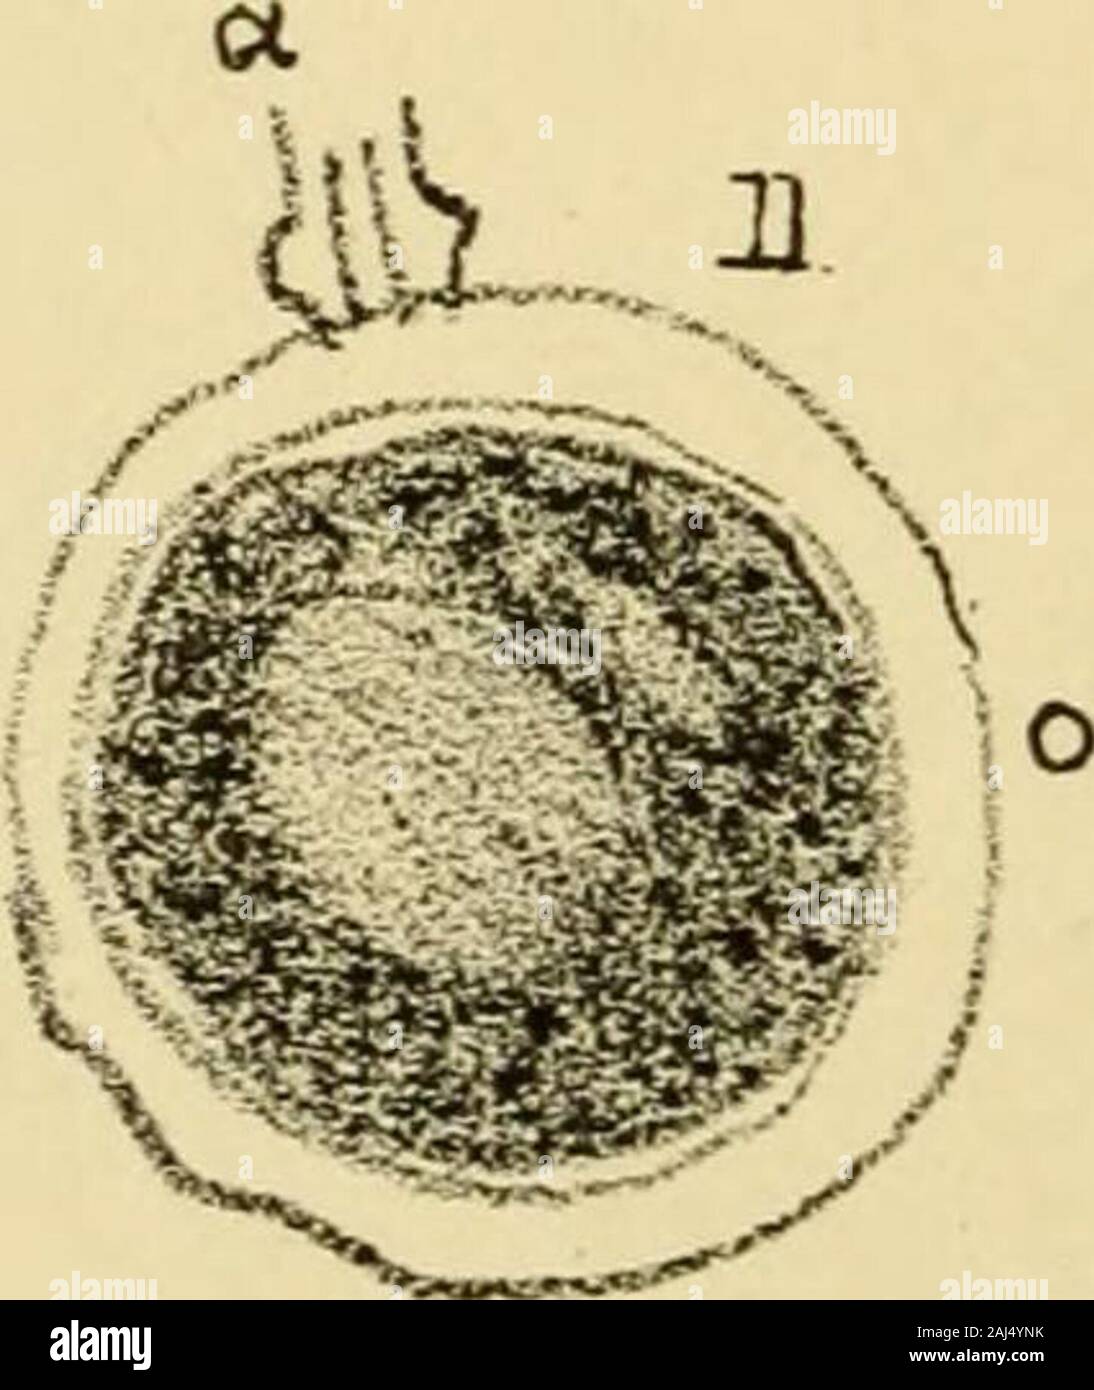 The Journal of microscopy and natural science . P&ronosporoy oulsvrv&OrzbTru. THE JOURNAL OF MICROSCOPY AND NATURAL SCIENCE: the journal ofThe Postal Microscopical Society. OCTOBER, 1884. ®n tbe peronoepor^. By George Norman, M.R.C.S.E. Plates 20, 21, 22, 23, 24. Second Part. AVING given a general account of the life-historyof the Peronosporoe, we can now proceed to examinesome of the more striking members of the genus,beginning with those least known, and reserving thepotato fungus to the last. P. Gangliformis, the Lettuce Peronospora. Threads of the mycelium stout, now and thentorulose; suck Stock Photo